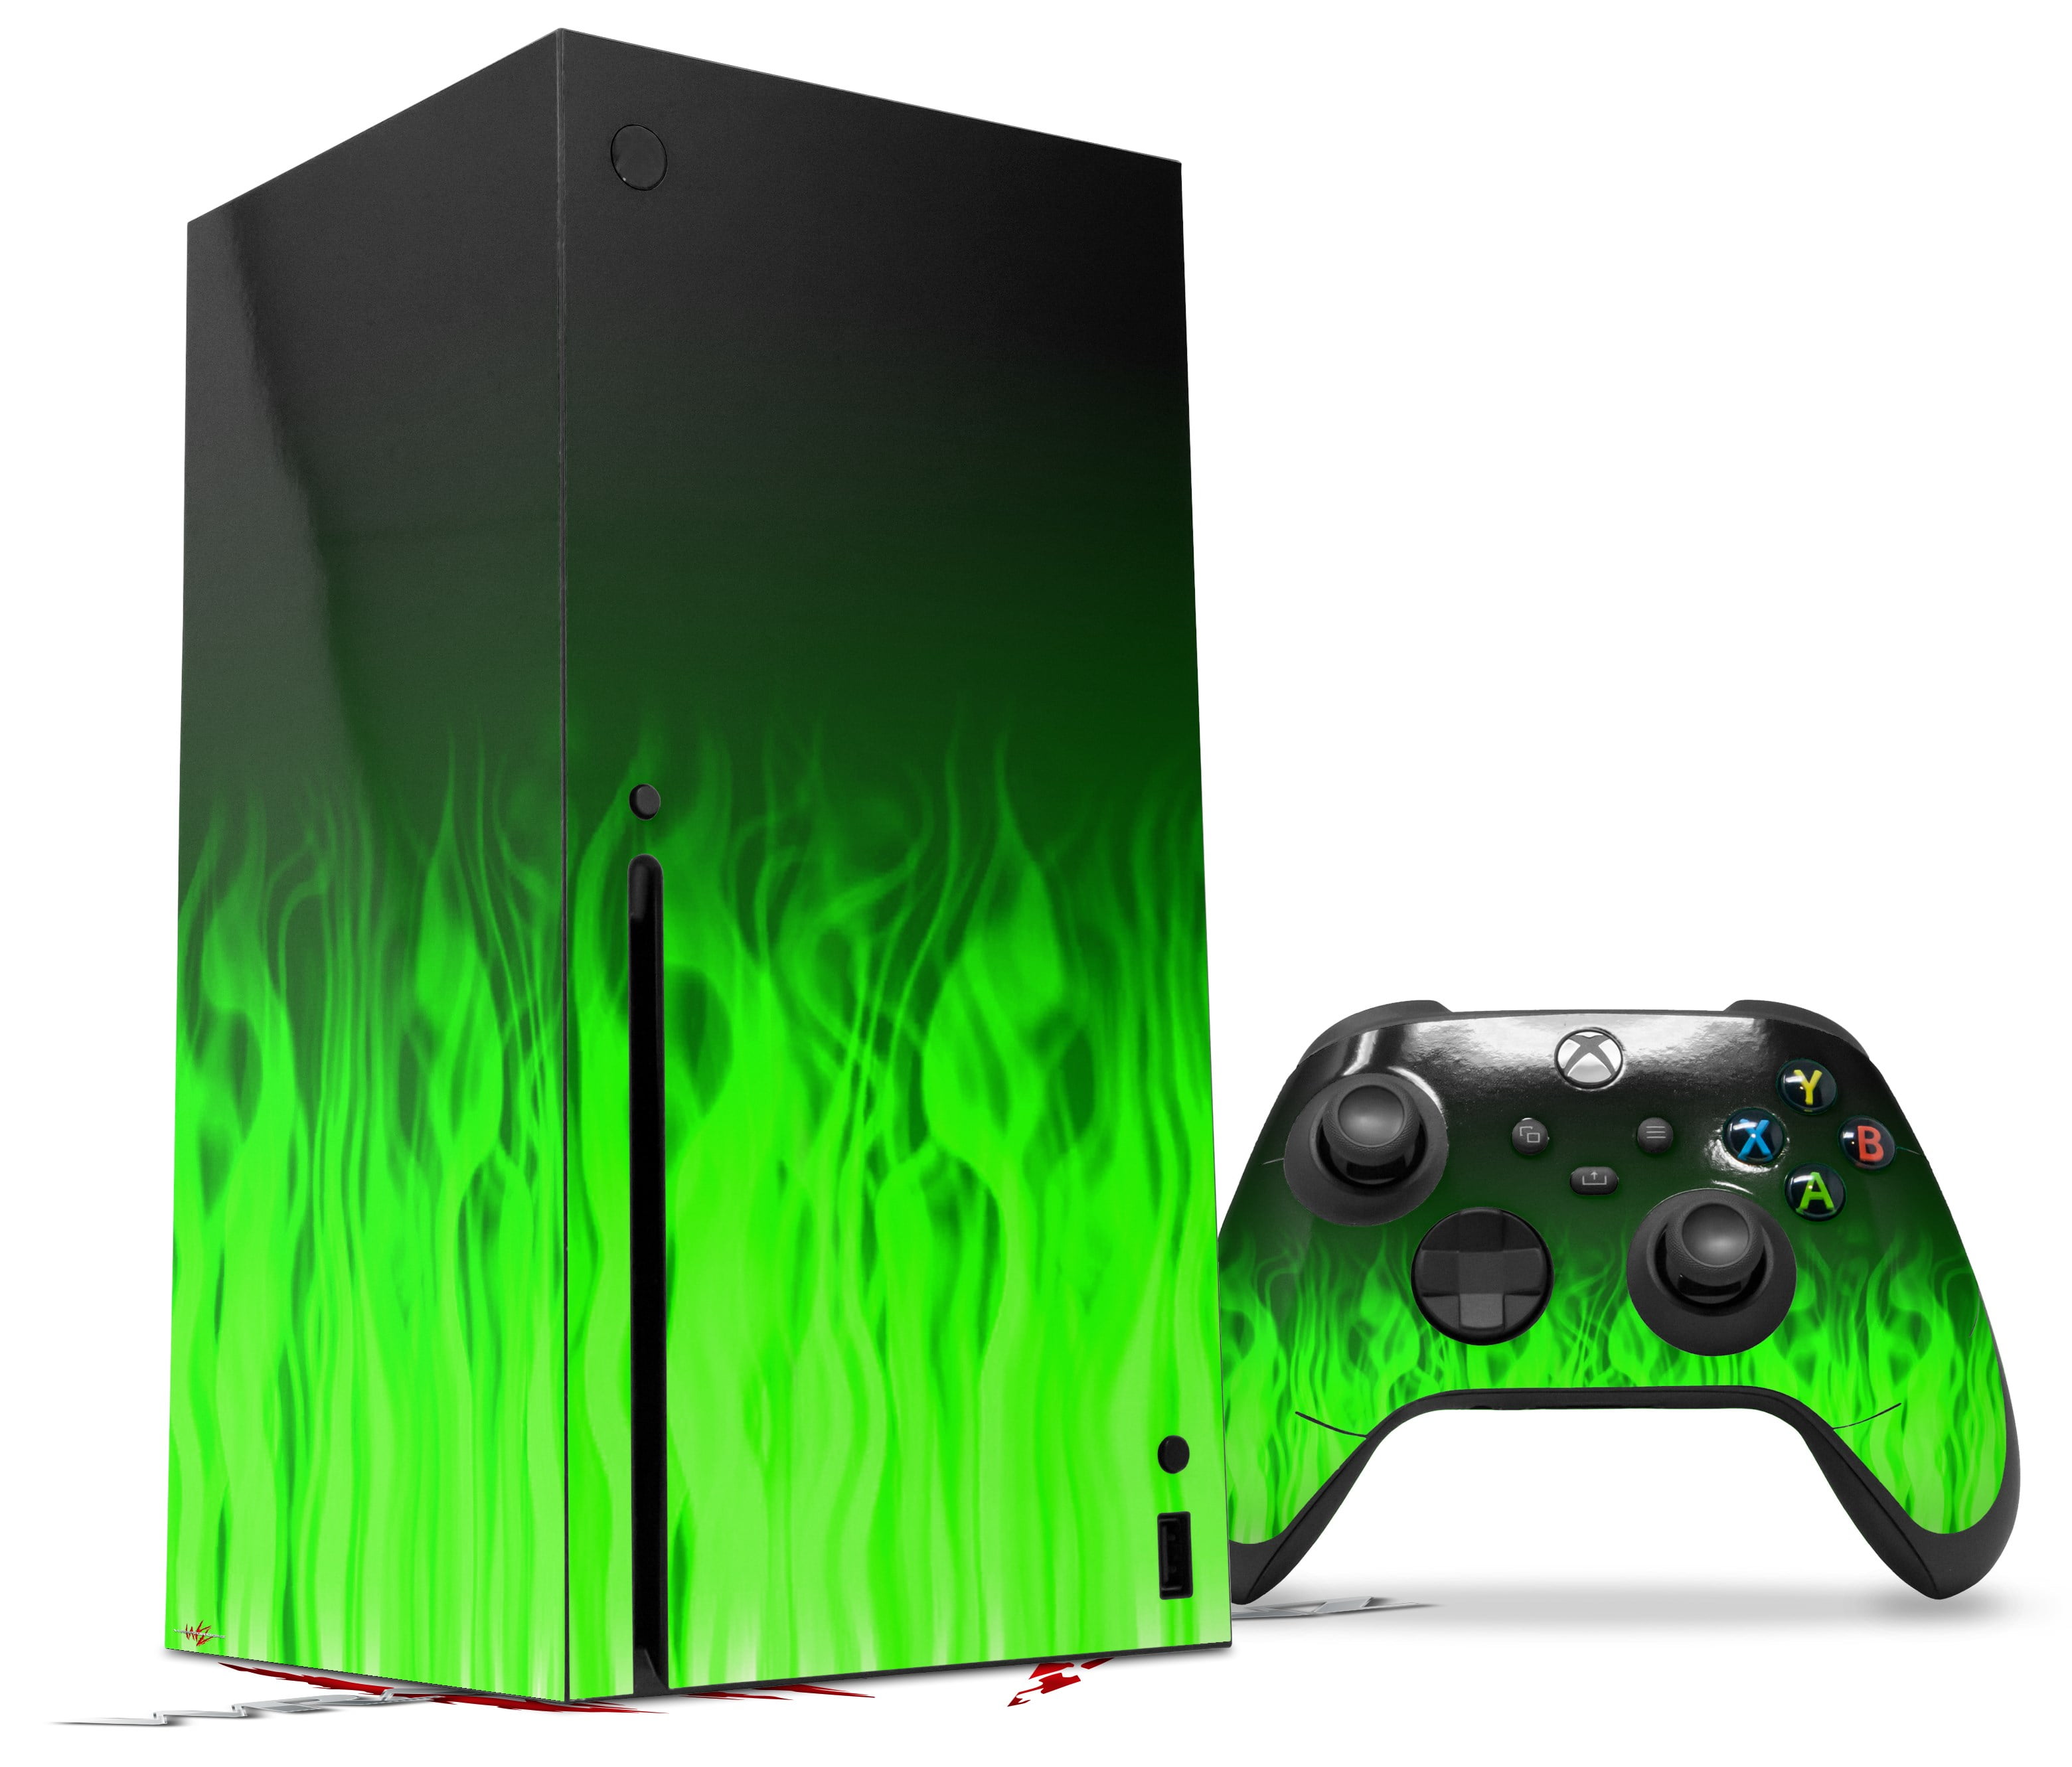 WraptorSkinz Skin Wrap compatible with the 2020 XBOX Series X Console and  Controller Fire Green (XBOX NOT INCLUDED)